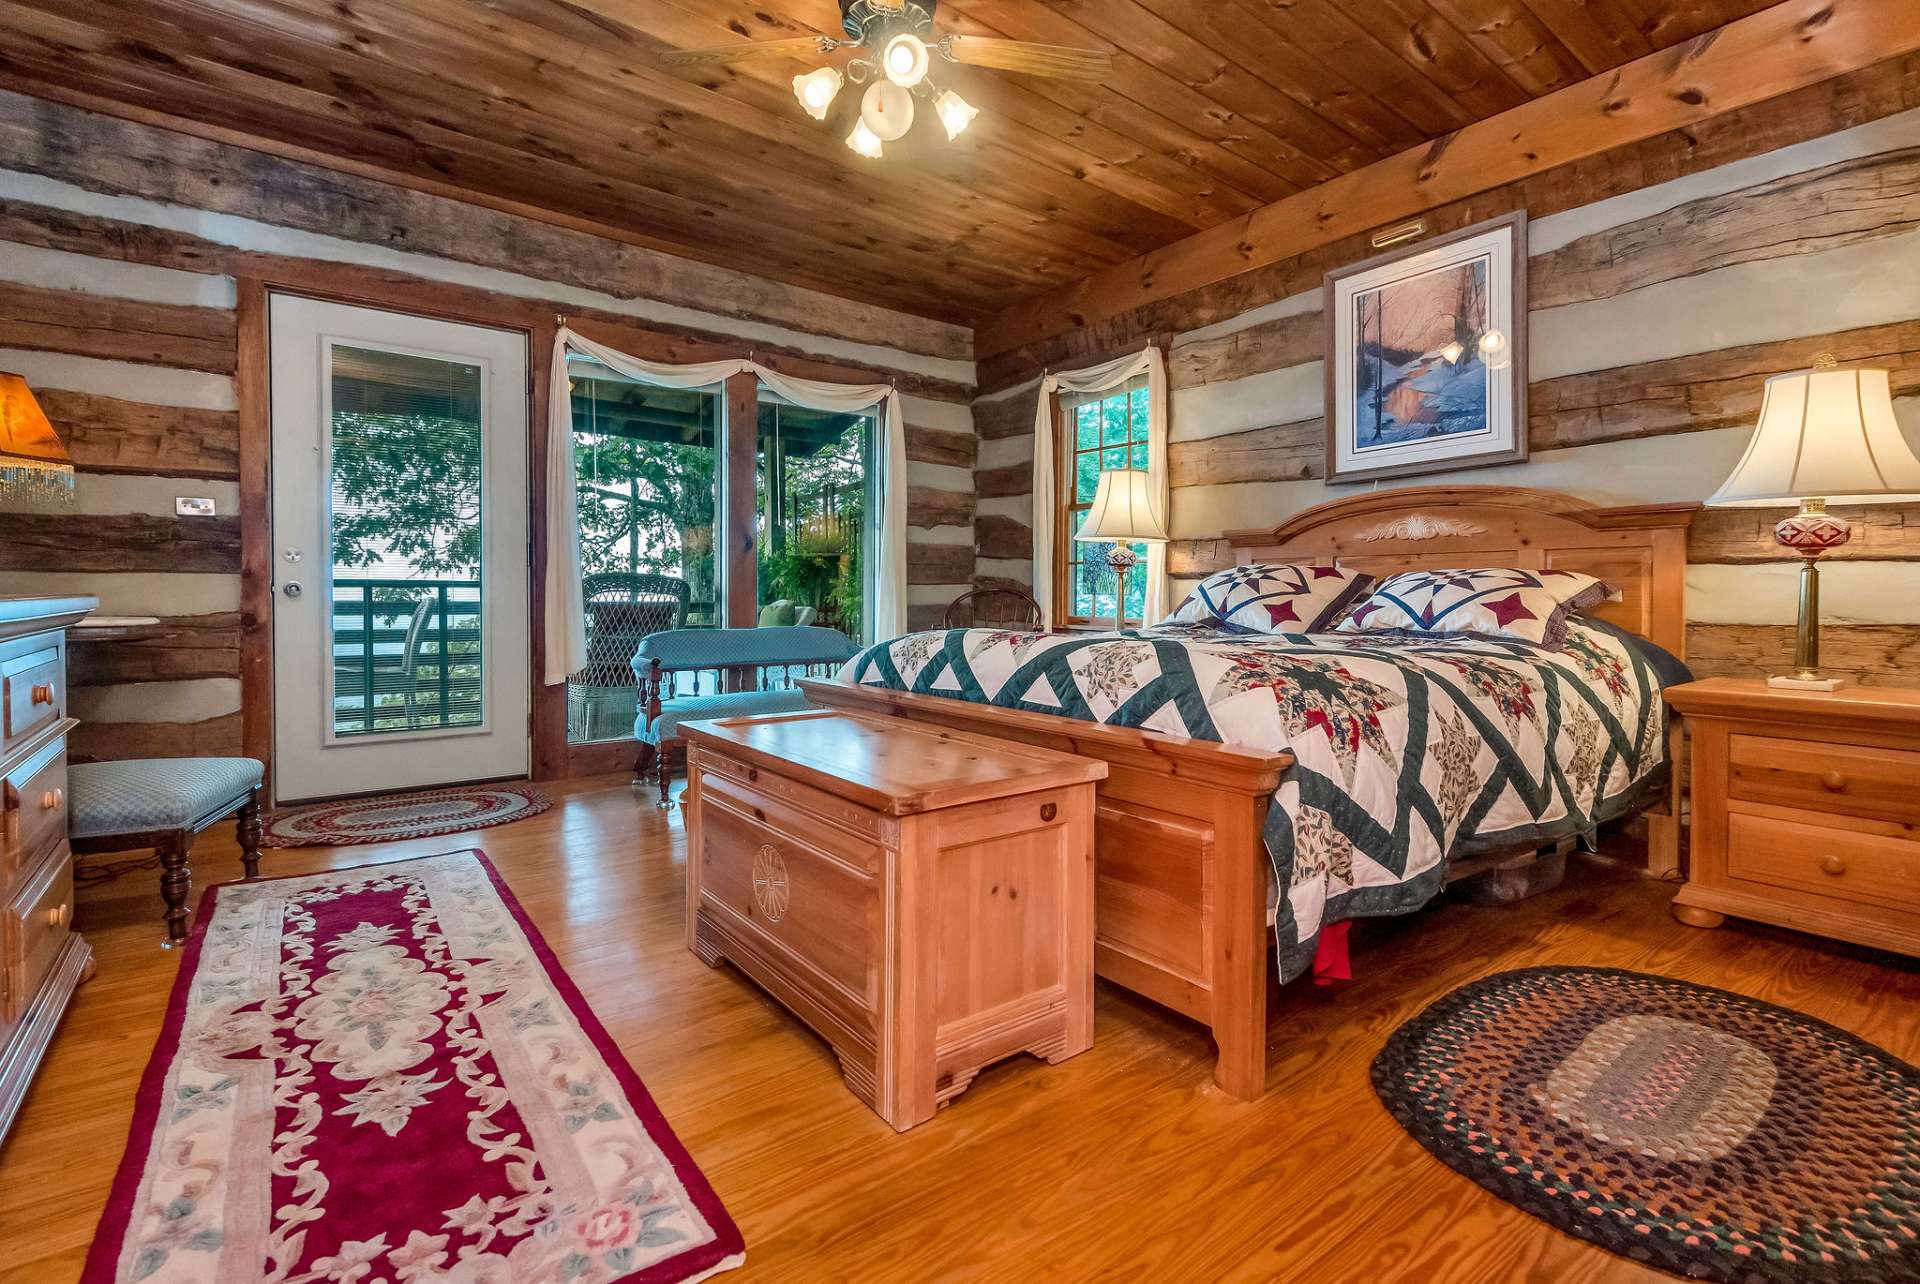 Your guests will love staying in this bedroom with access to the covered deck.